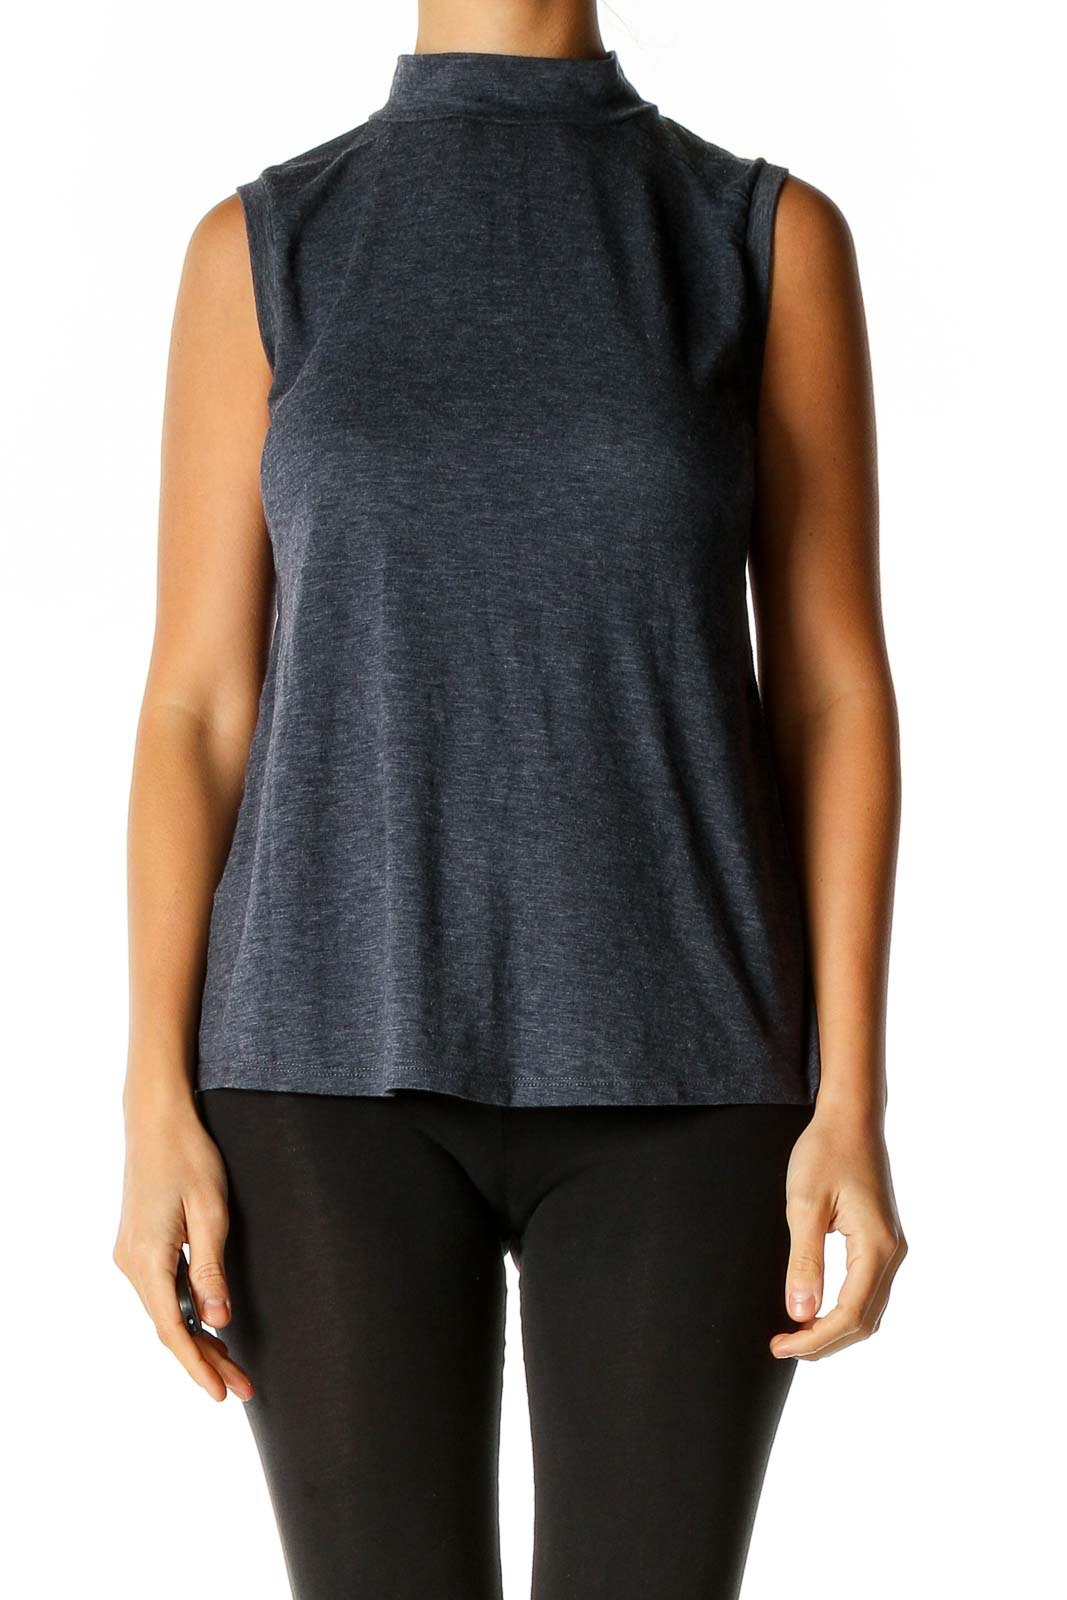 Heather Blue Solid Classic Mock Neck Top Front